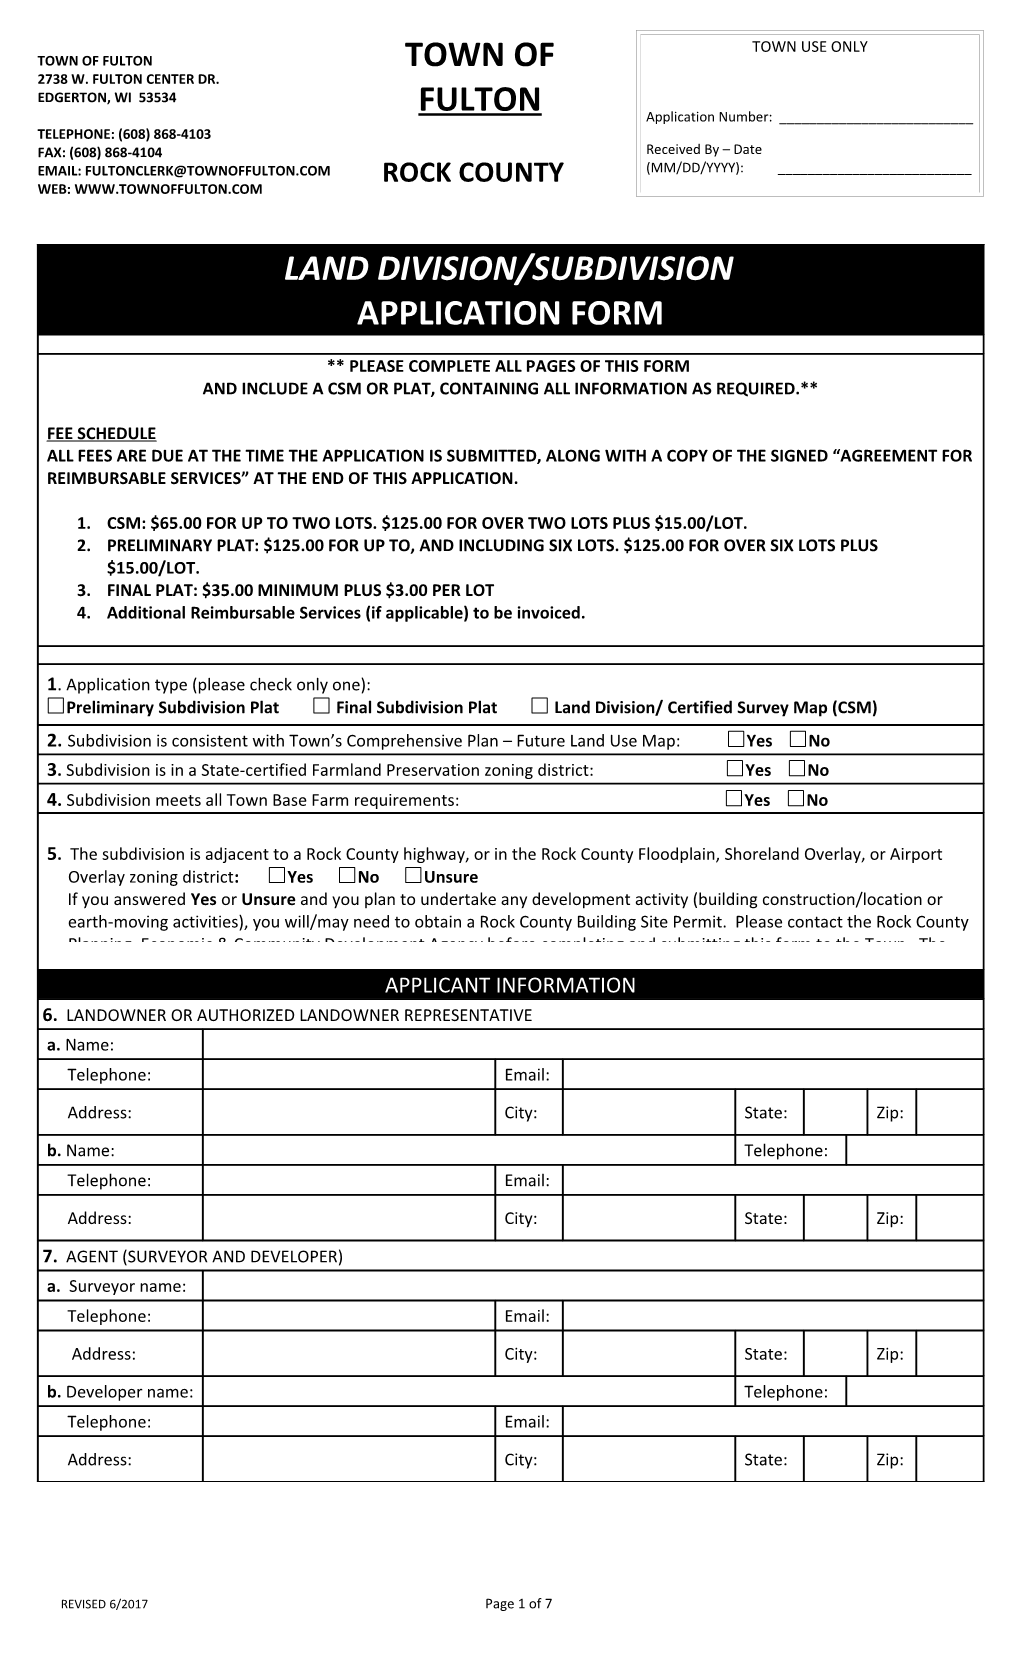 Town of Fulton Preliminary Land Divison Application Information